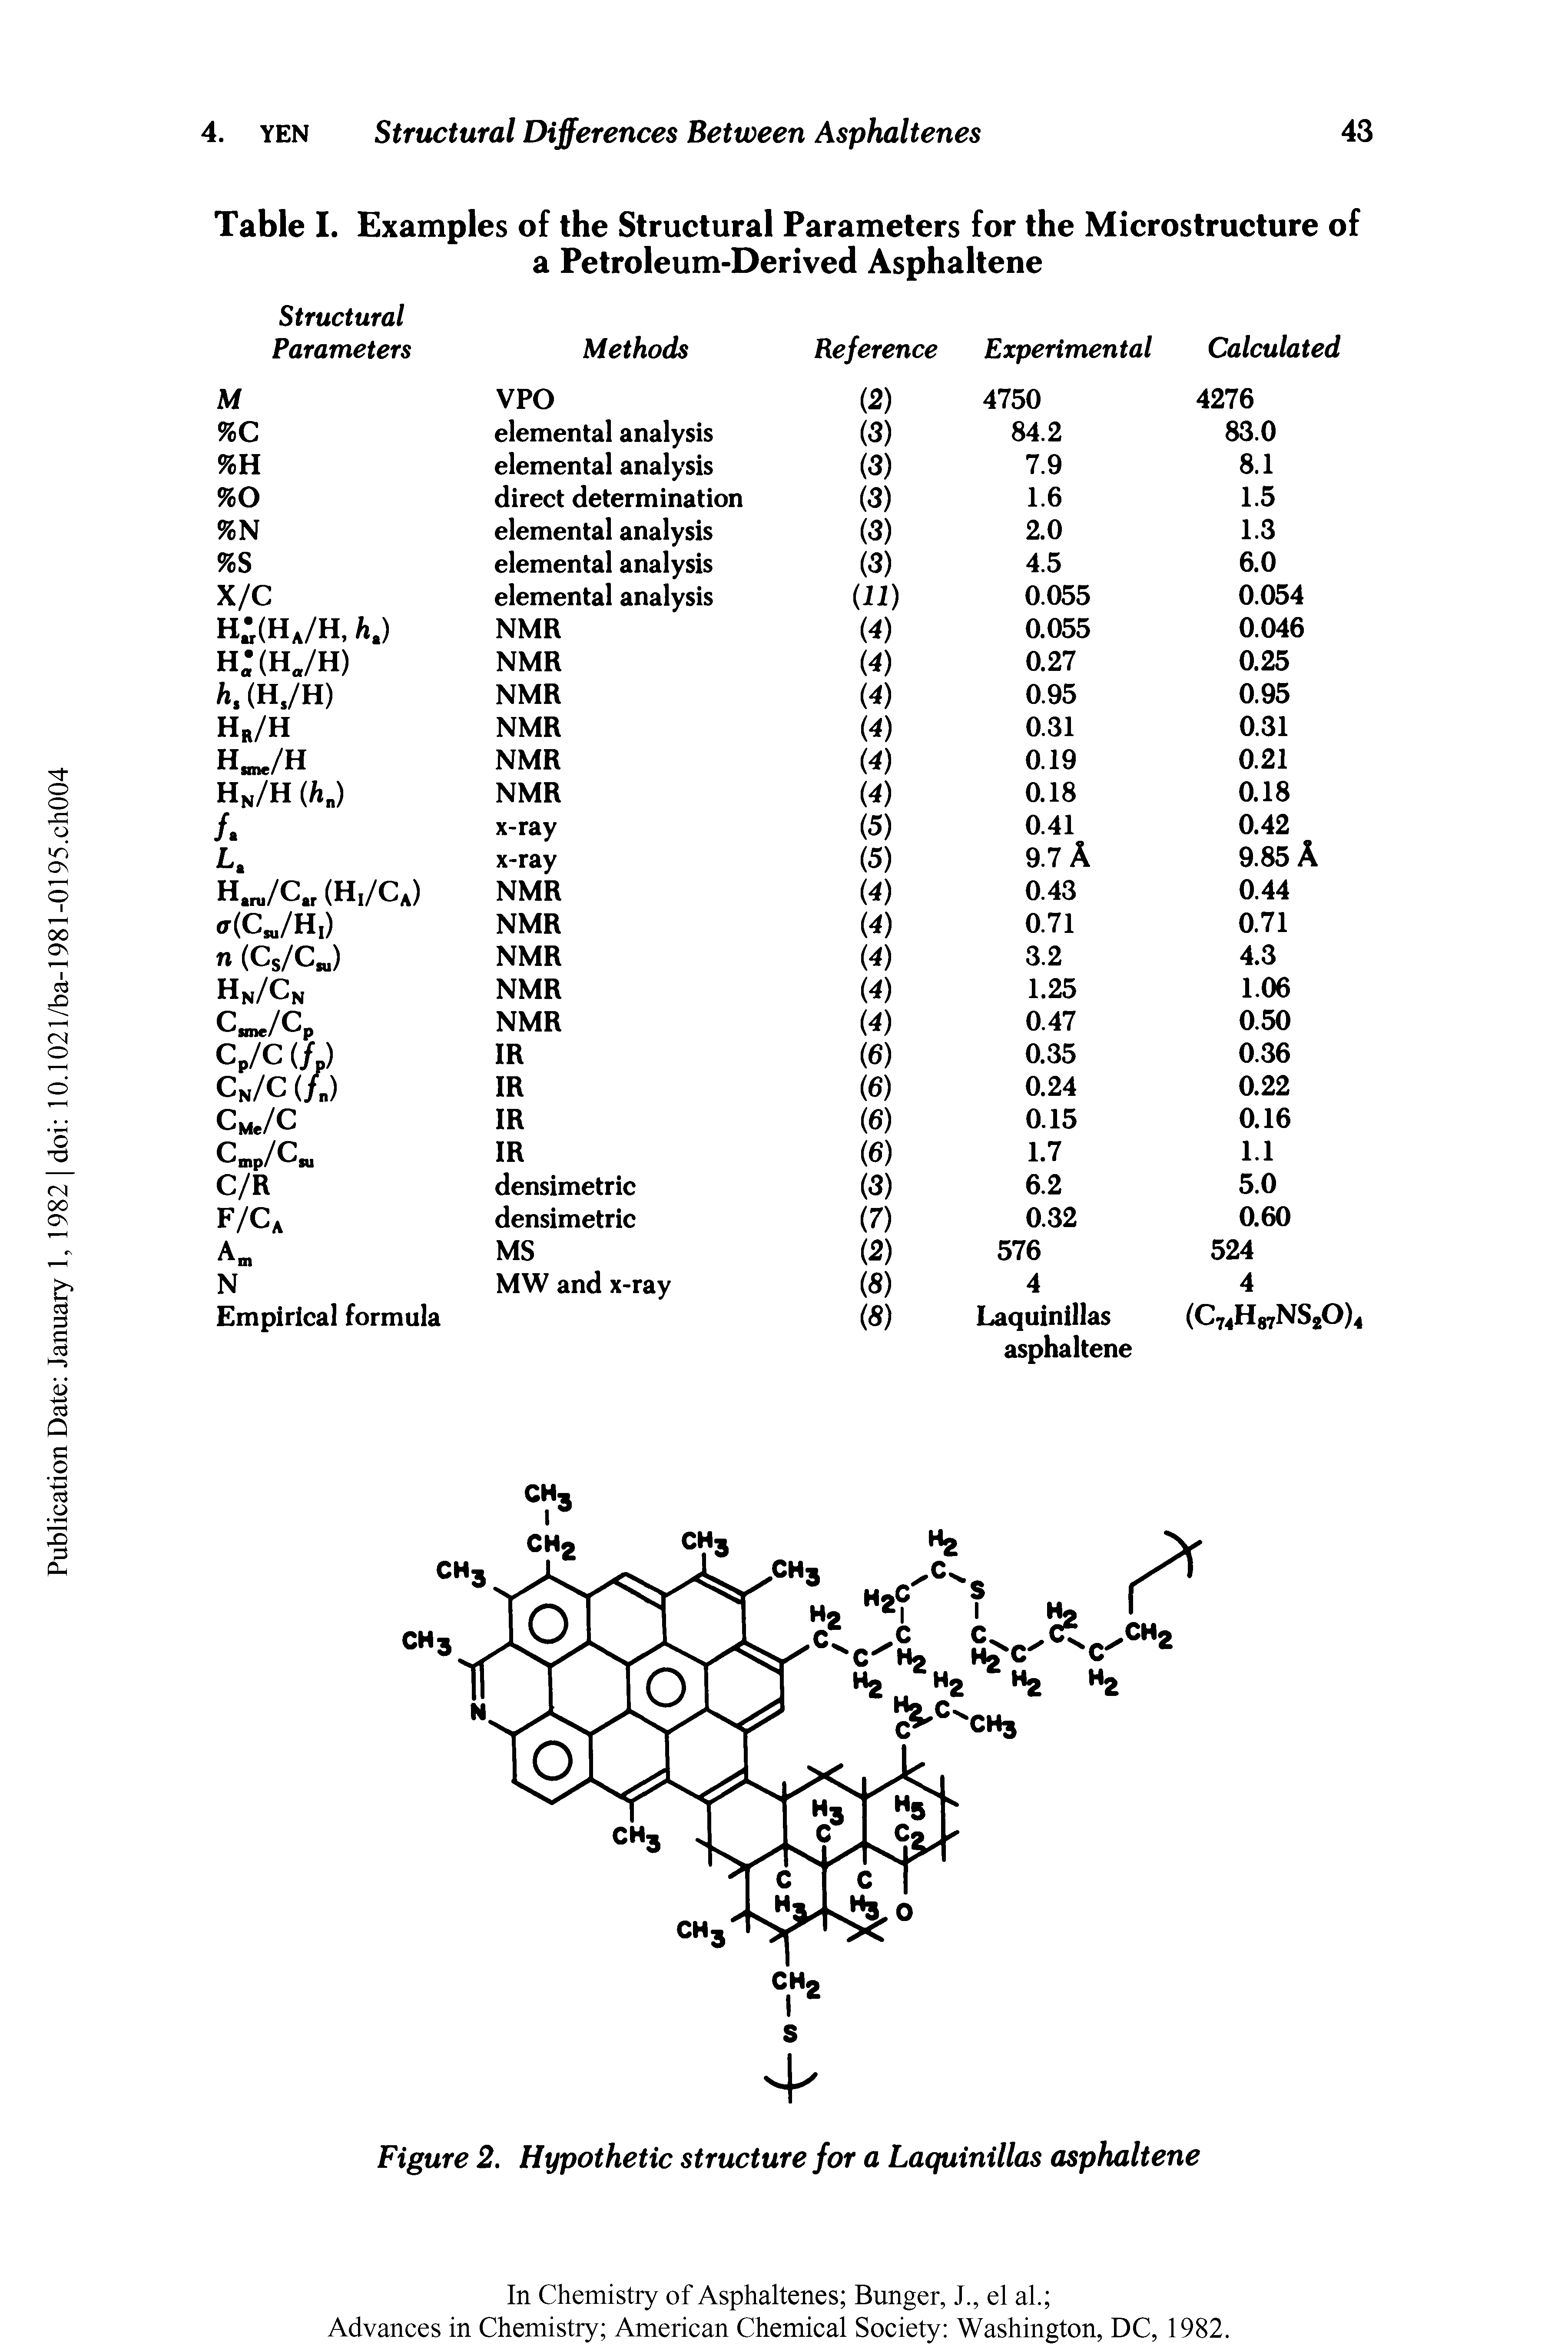 Table I. Examples of the Structural Parameters for the Microstructure of a Petroleum-Derived Asphaltene...